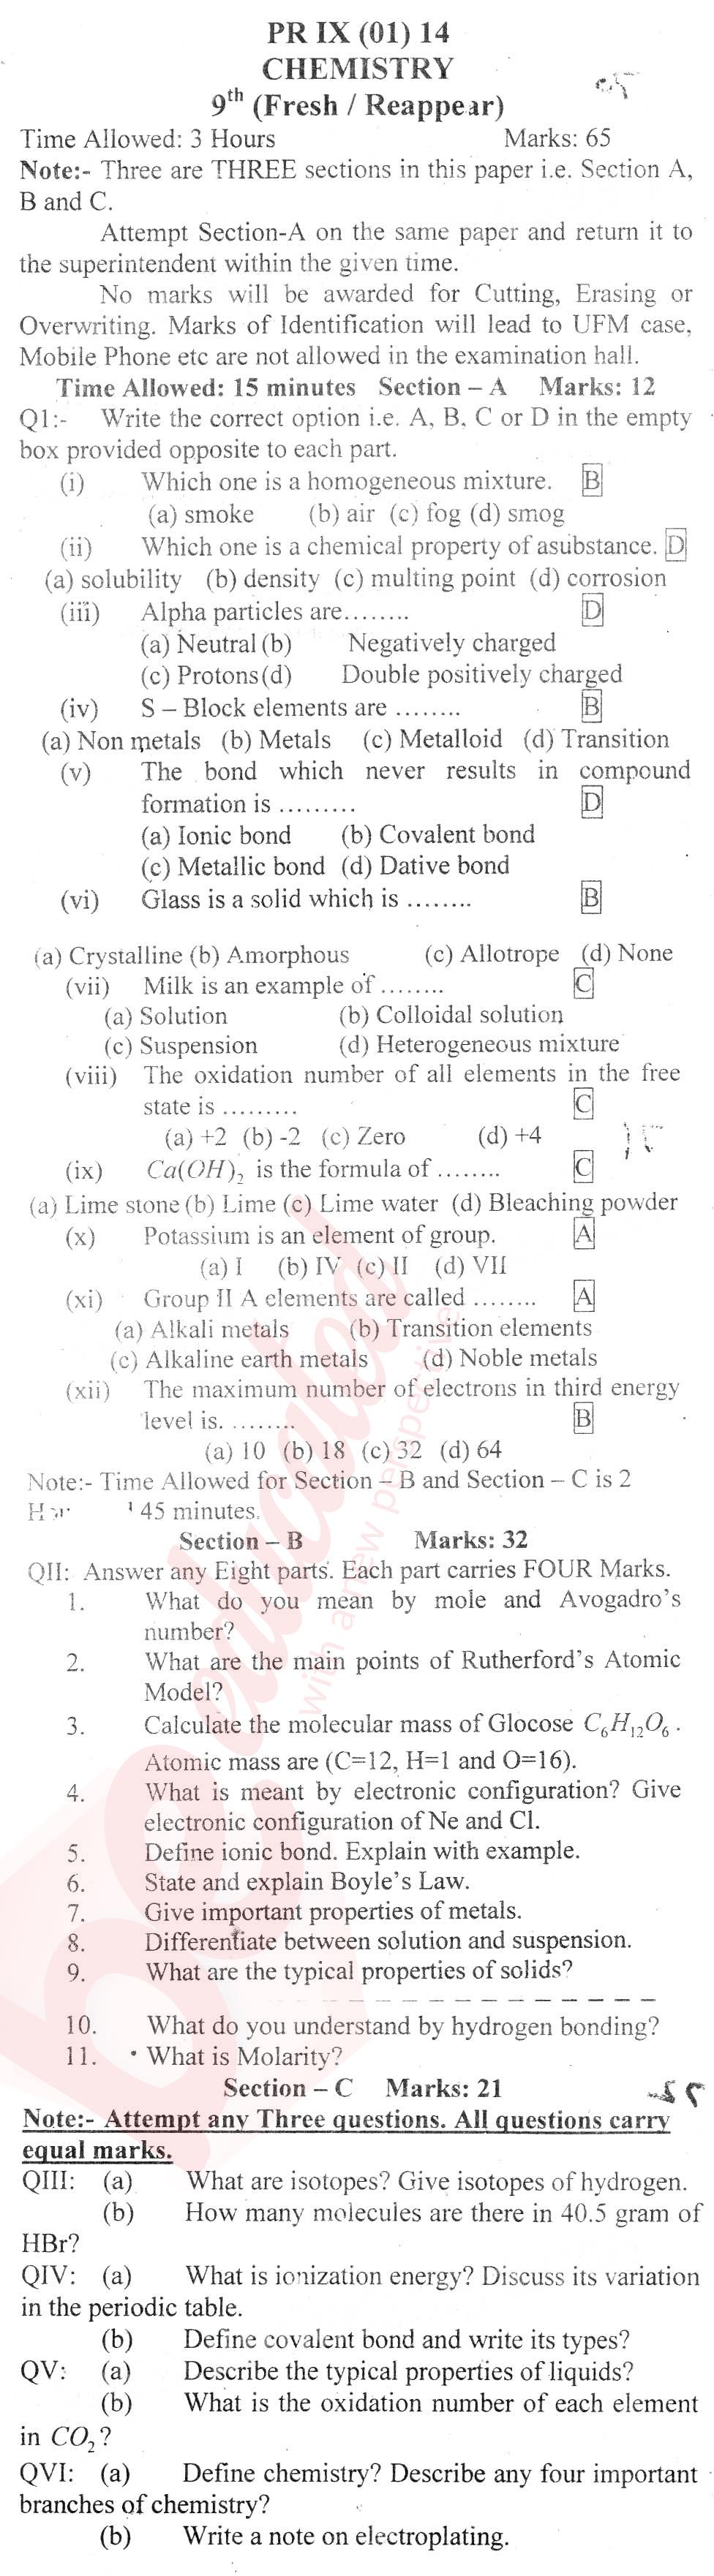 Chemistry 9th English Medium Past Paper Group 1 BISE Abbottabad 2014